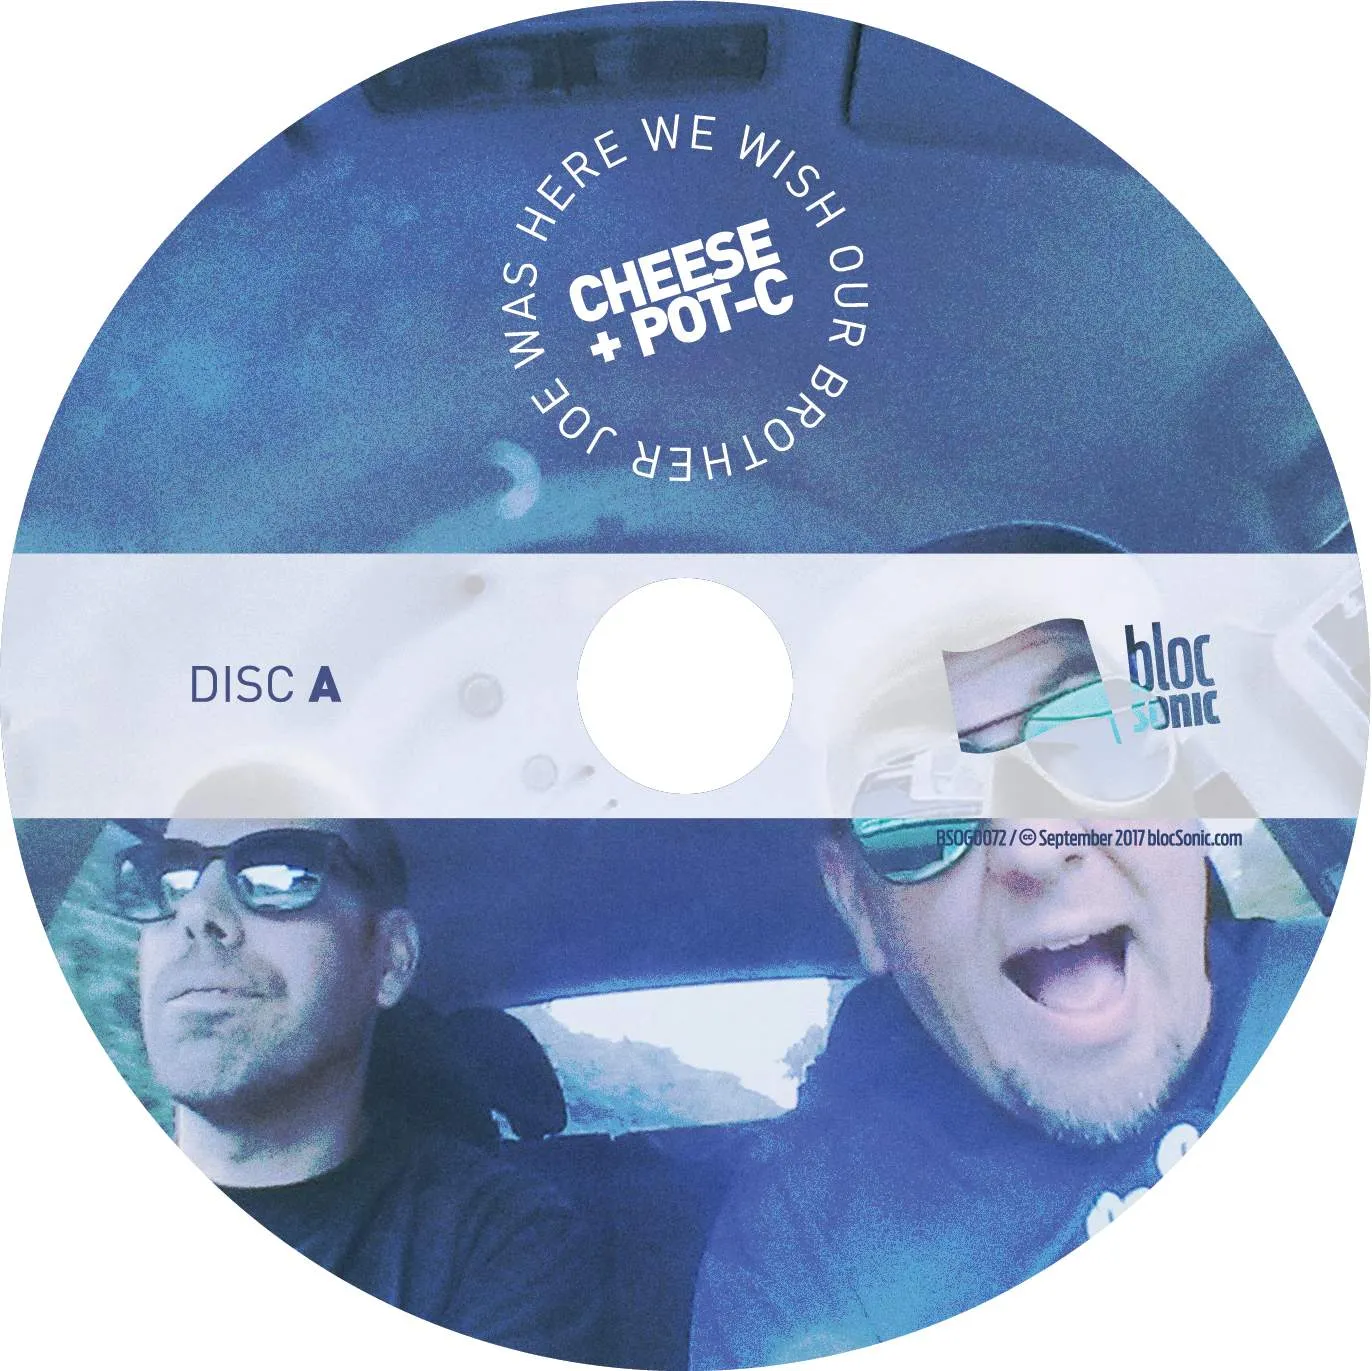 Album disc for “We Wish Our Brother Joe Was Here” by Cheese N Pot-C